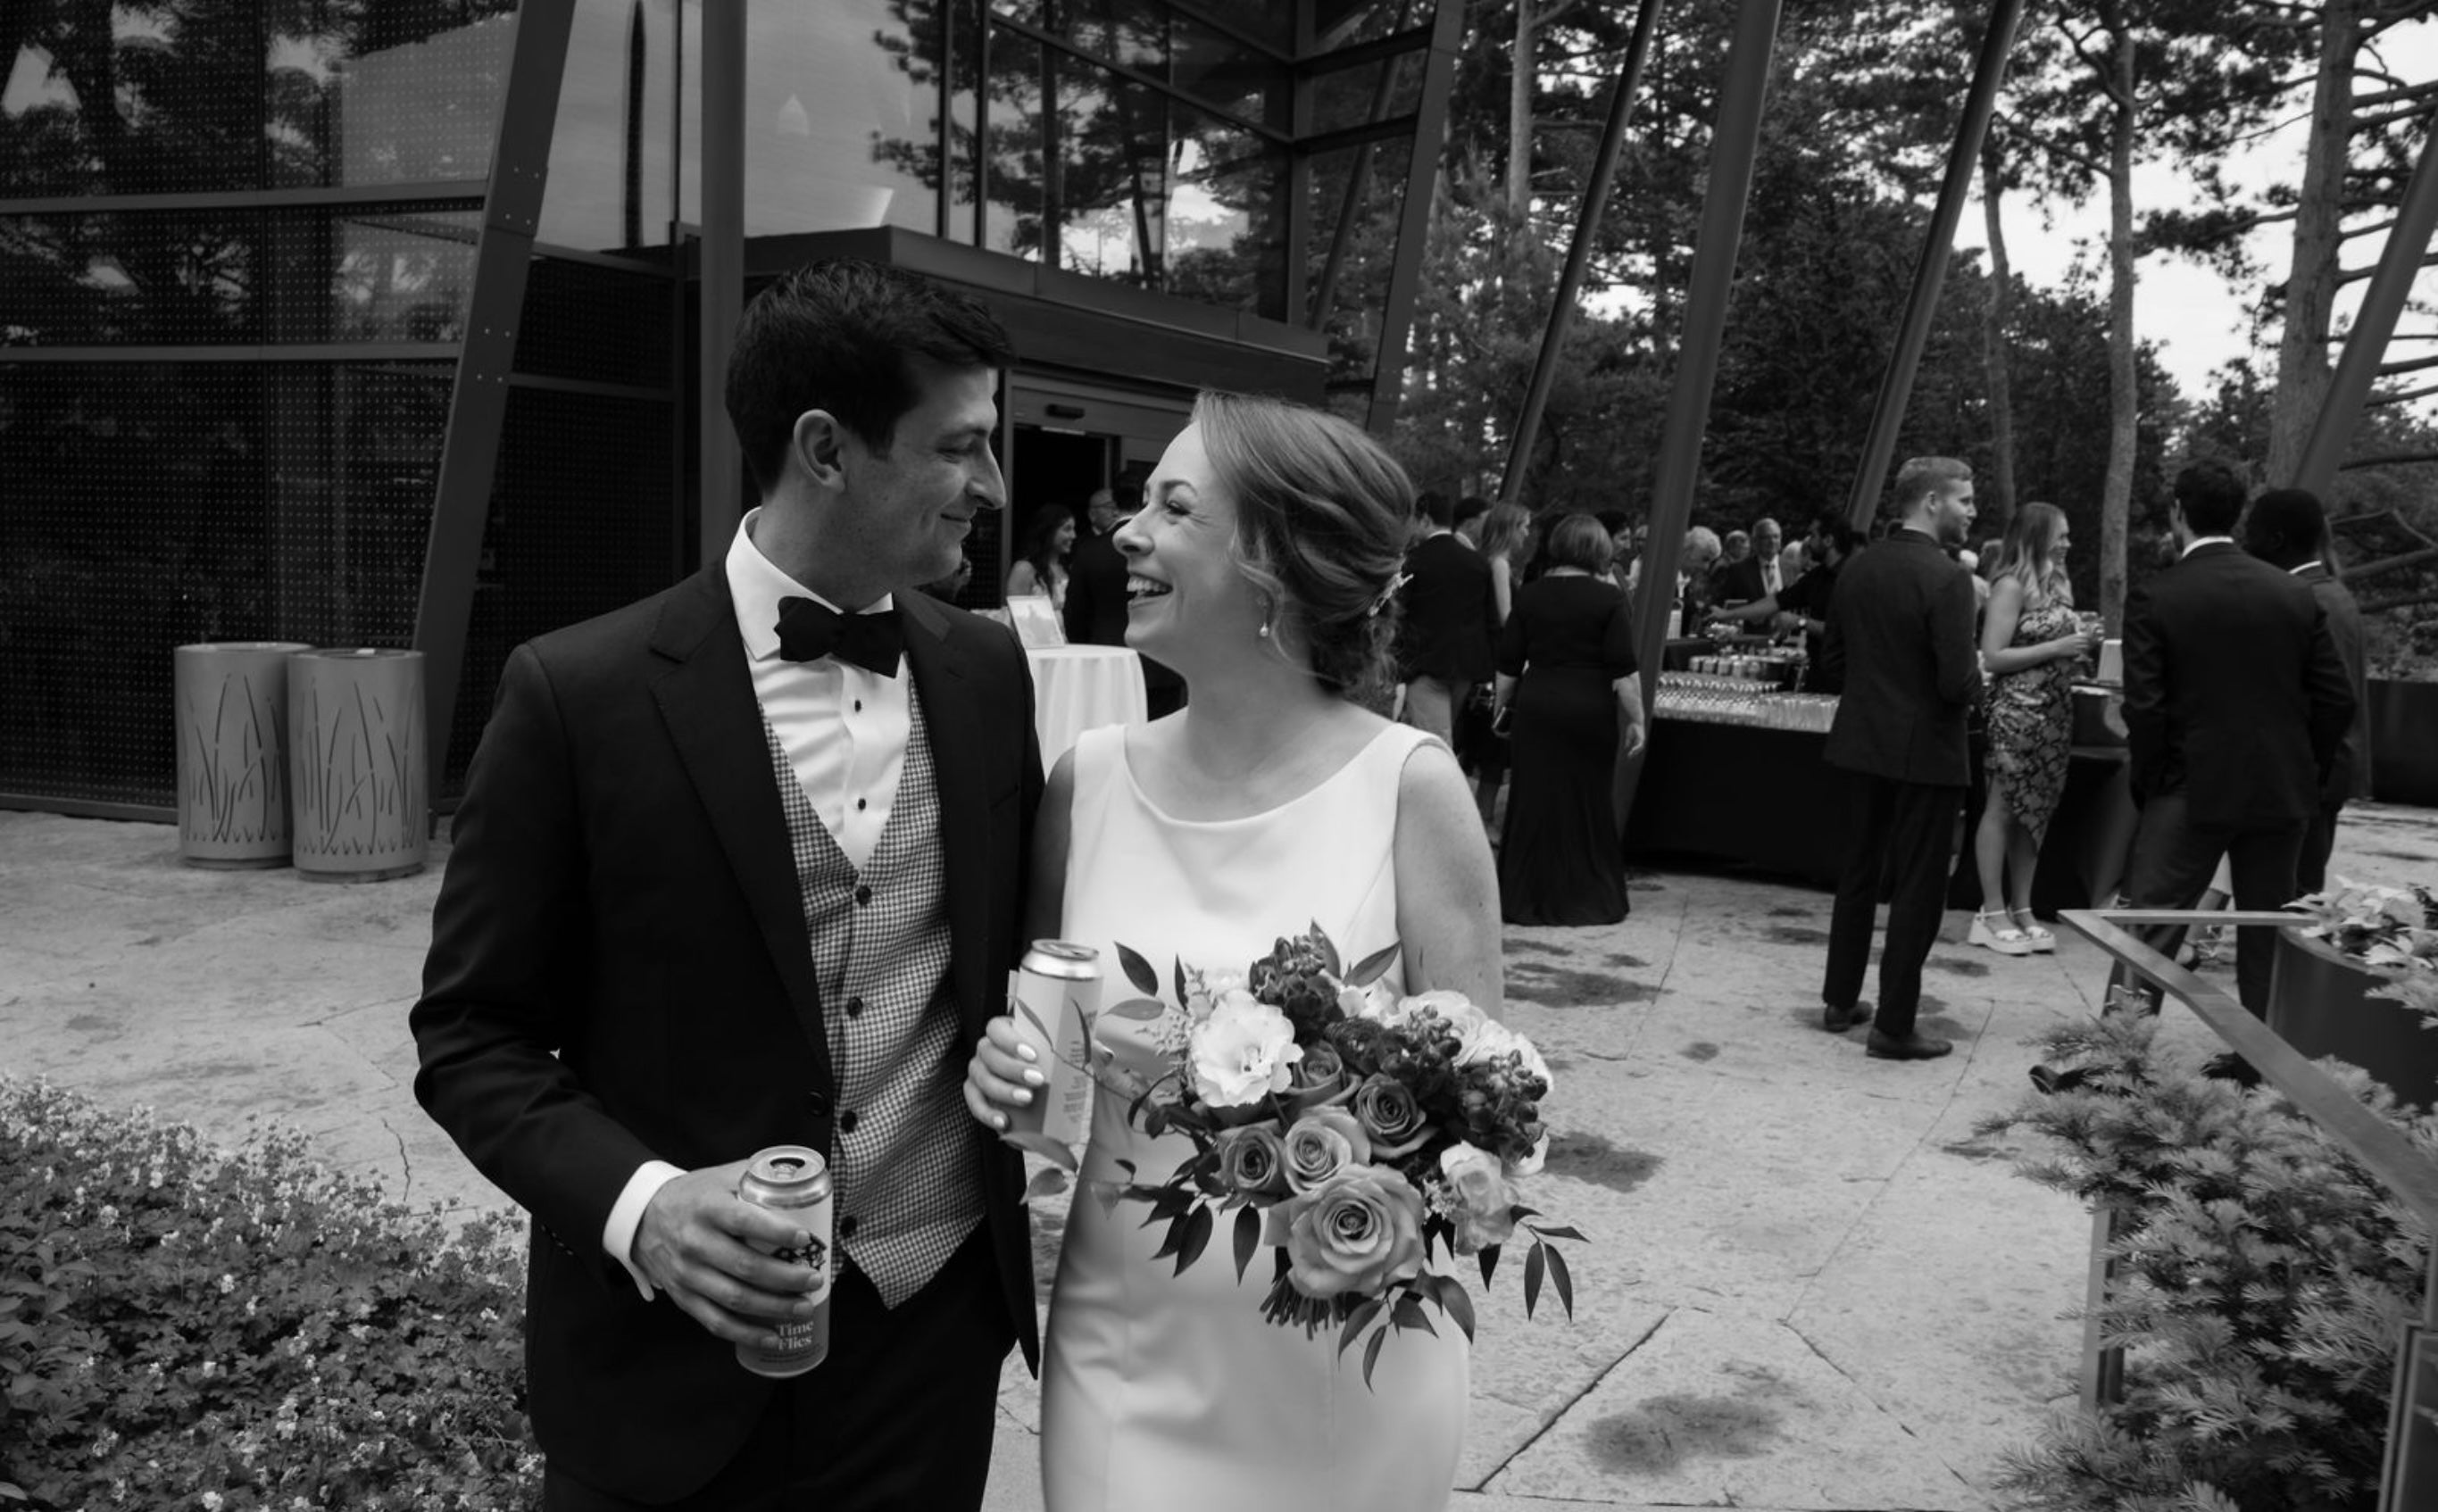 Couple with bouquet and beers at outdoor wedding in black and white